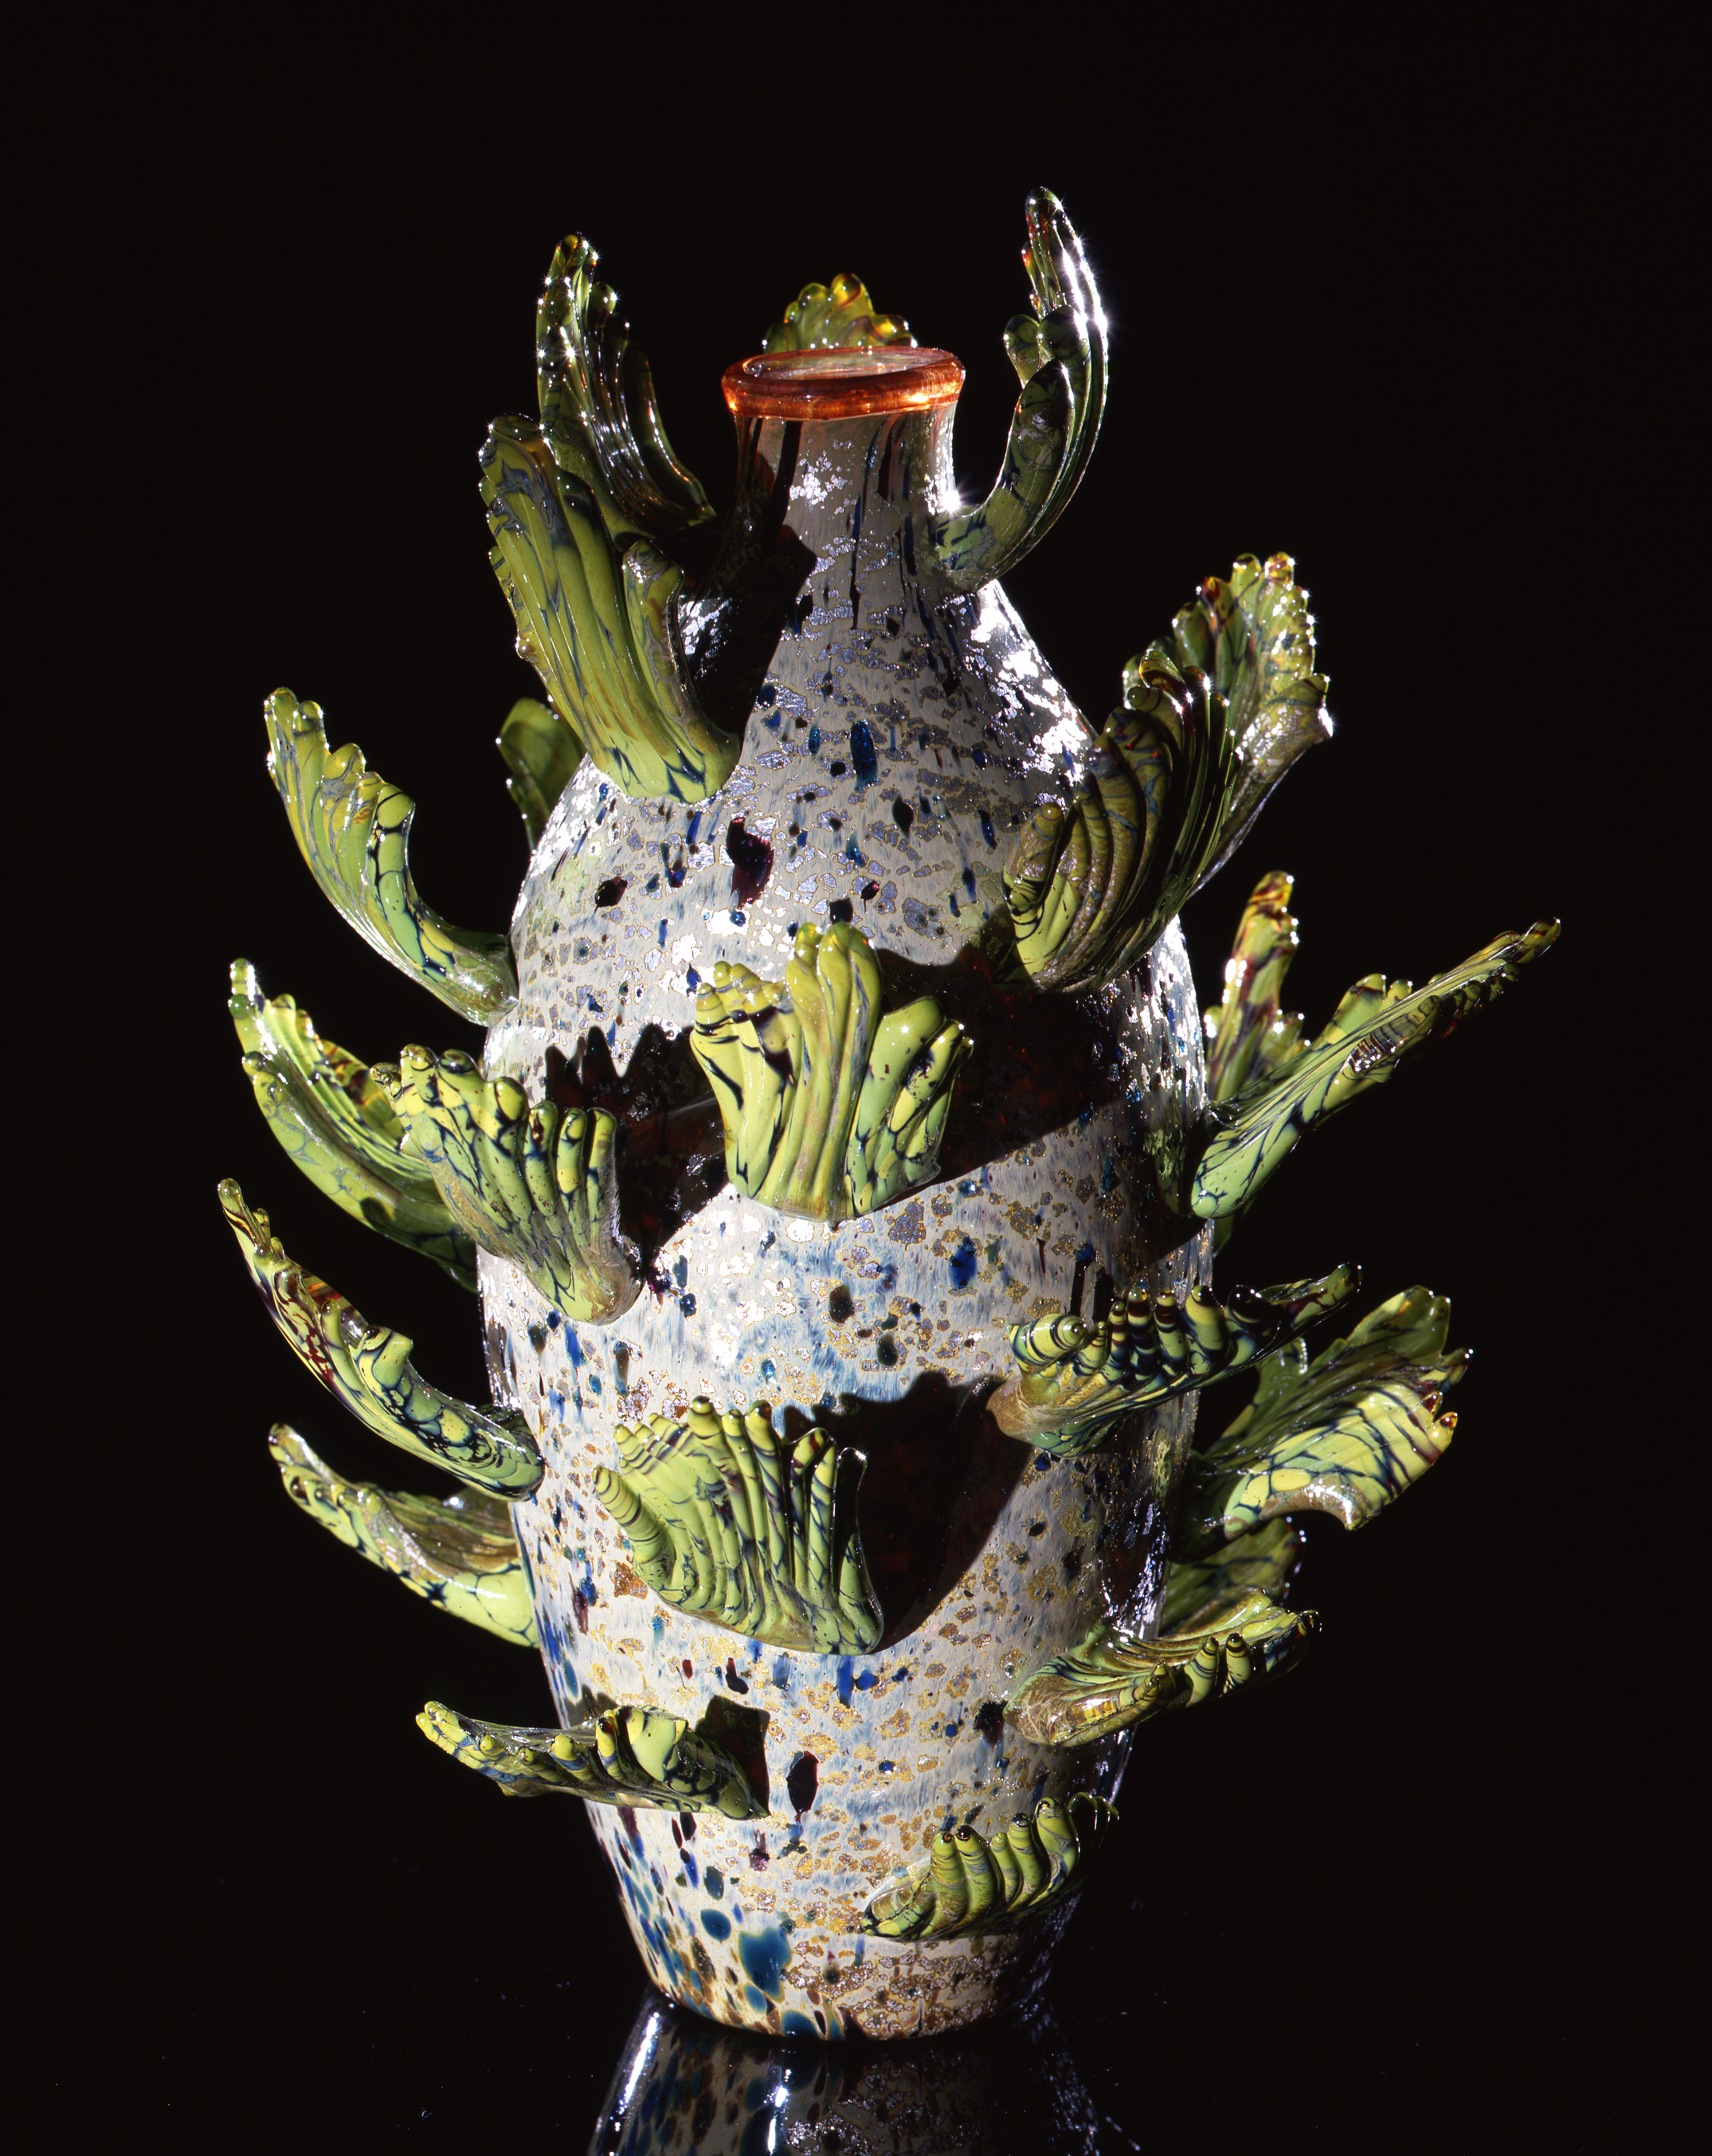  Dale Chihuly,&nbsp; Silver Piccolo Venetian with Chartreuse Leaves &nbsp;(1993, glass, 9 x 7 x 7 inches) 